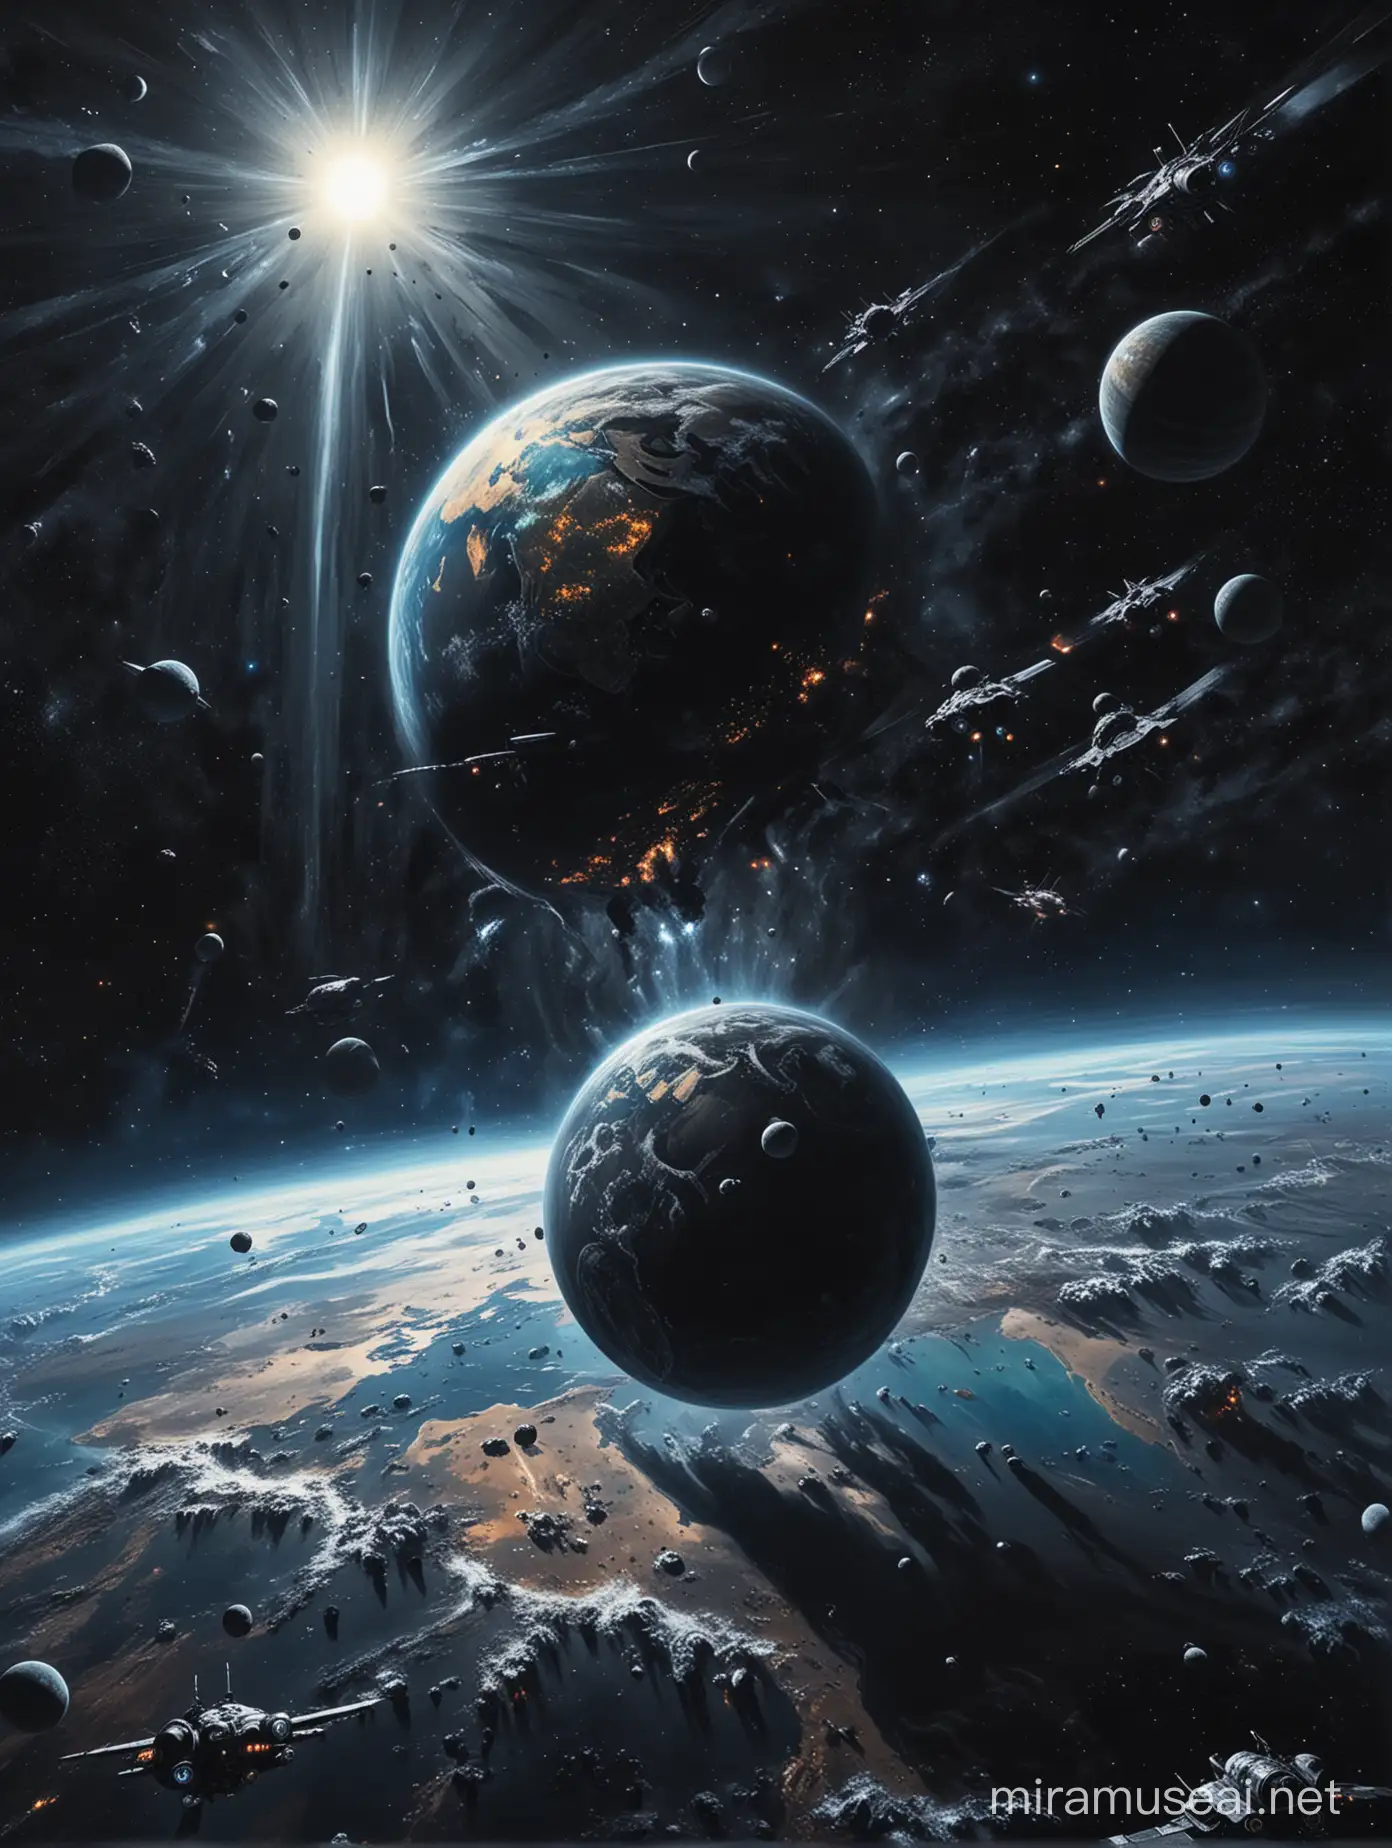 Stellar Convergence A Vivid Painting of Earth Amidst an Array of Approaching Spaceships